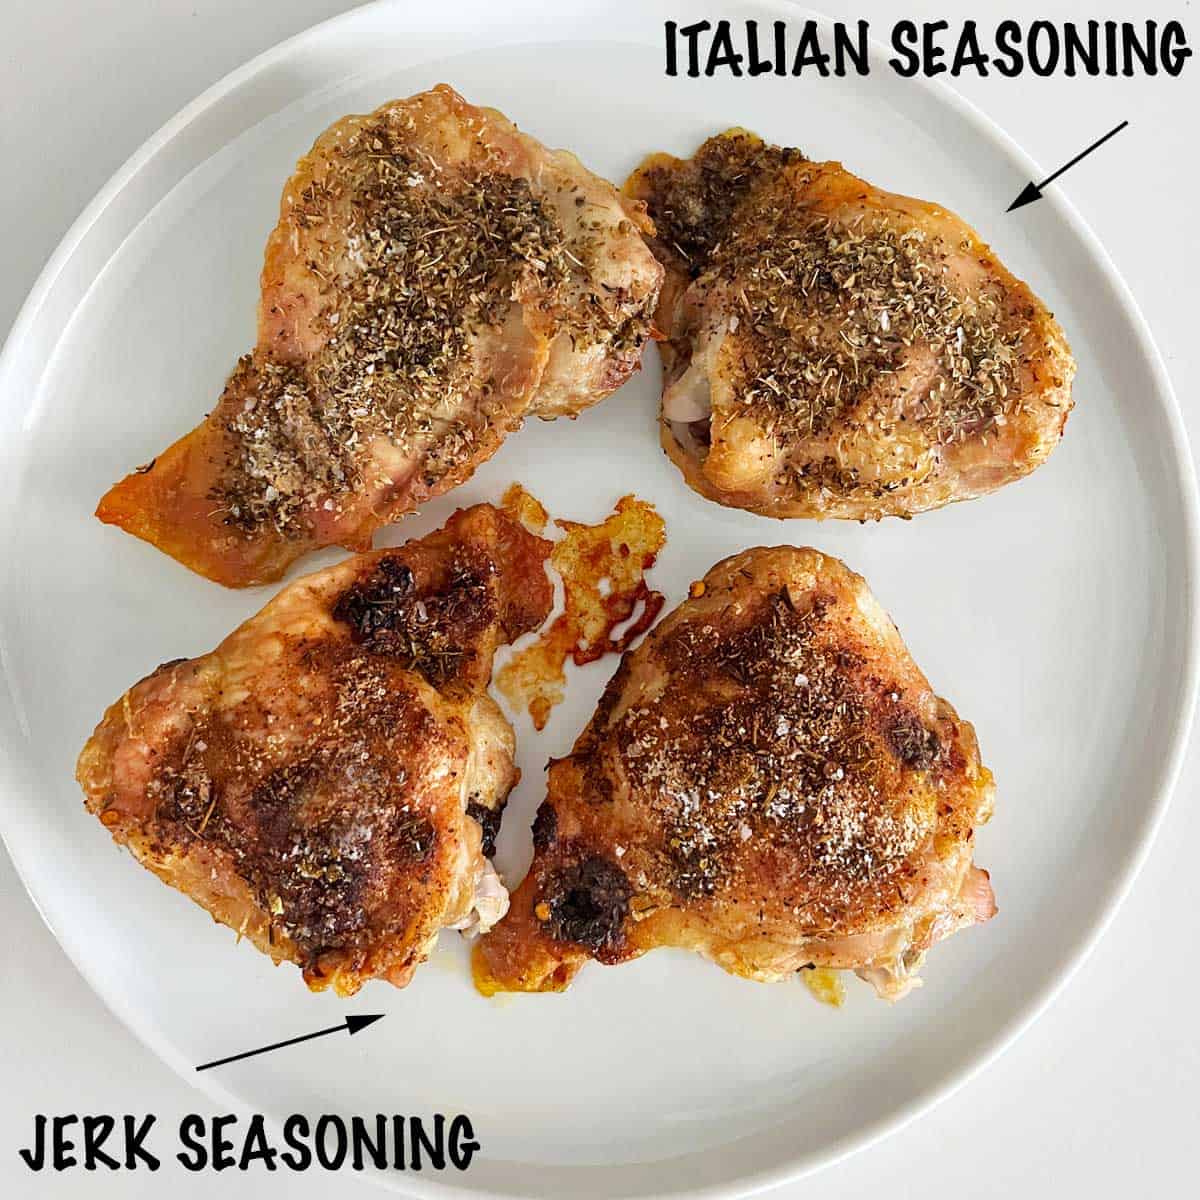 Four crispy chicken thighs on a plate, two with jerk seasoning and two with Italian seasoning.